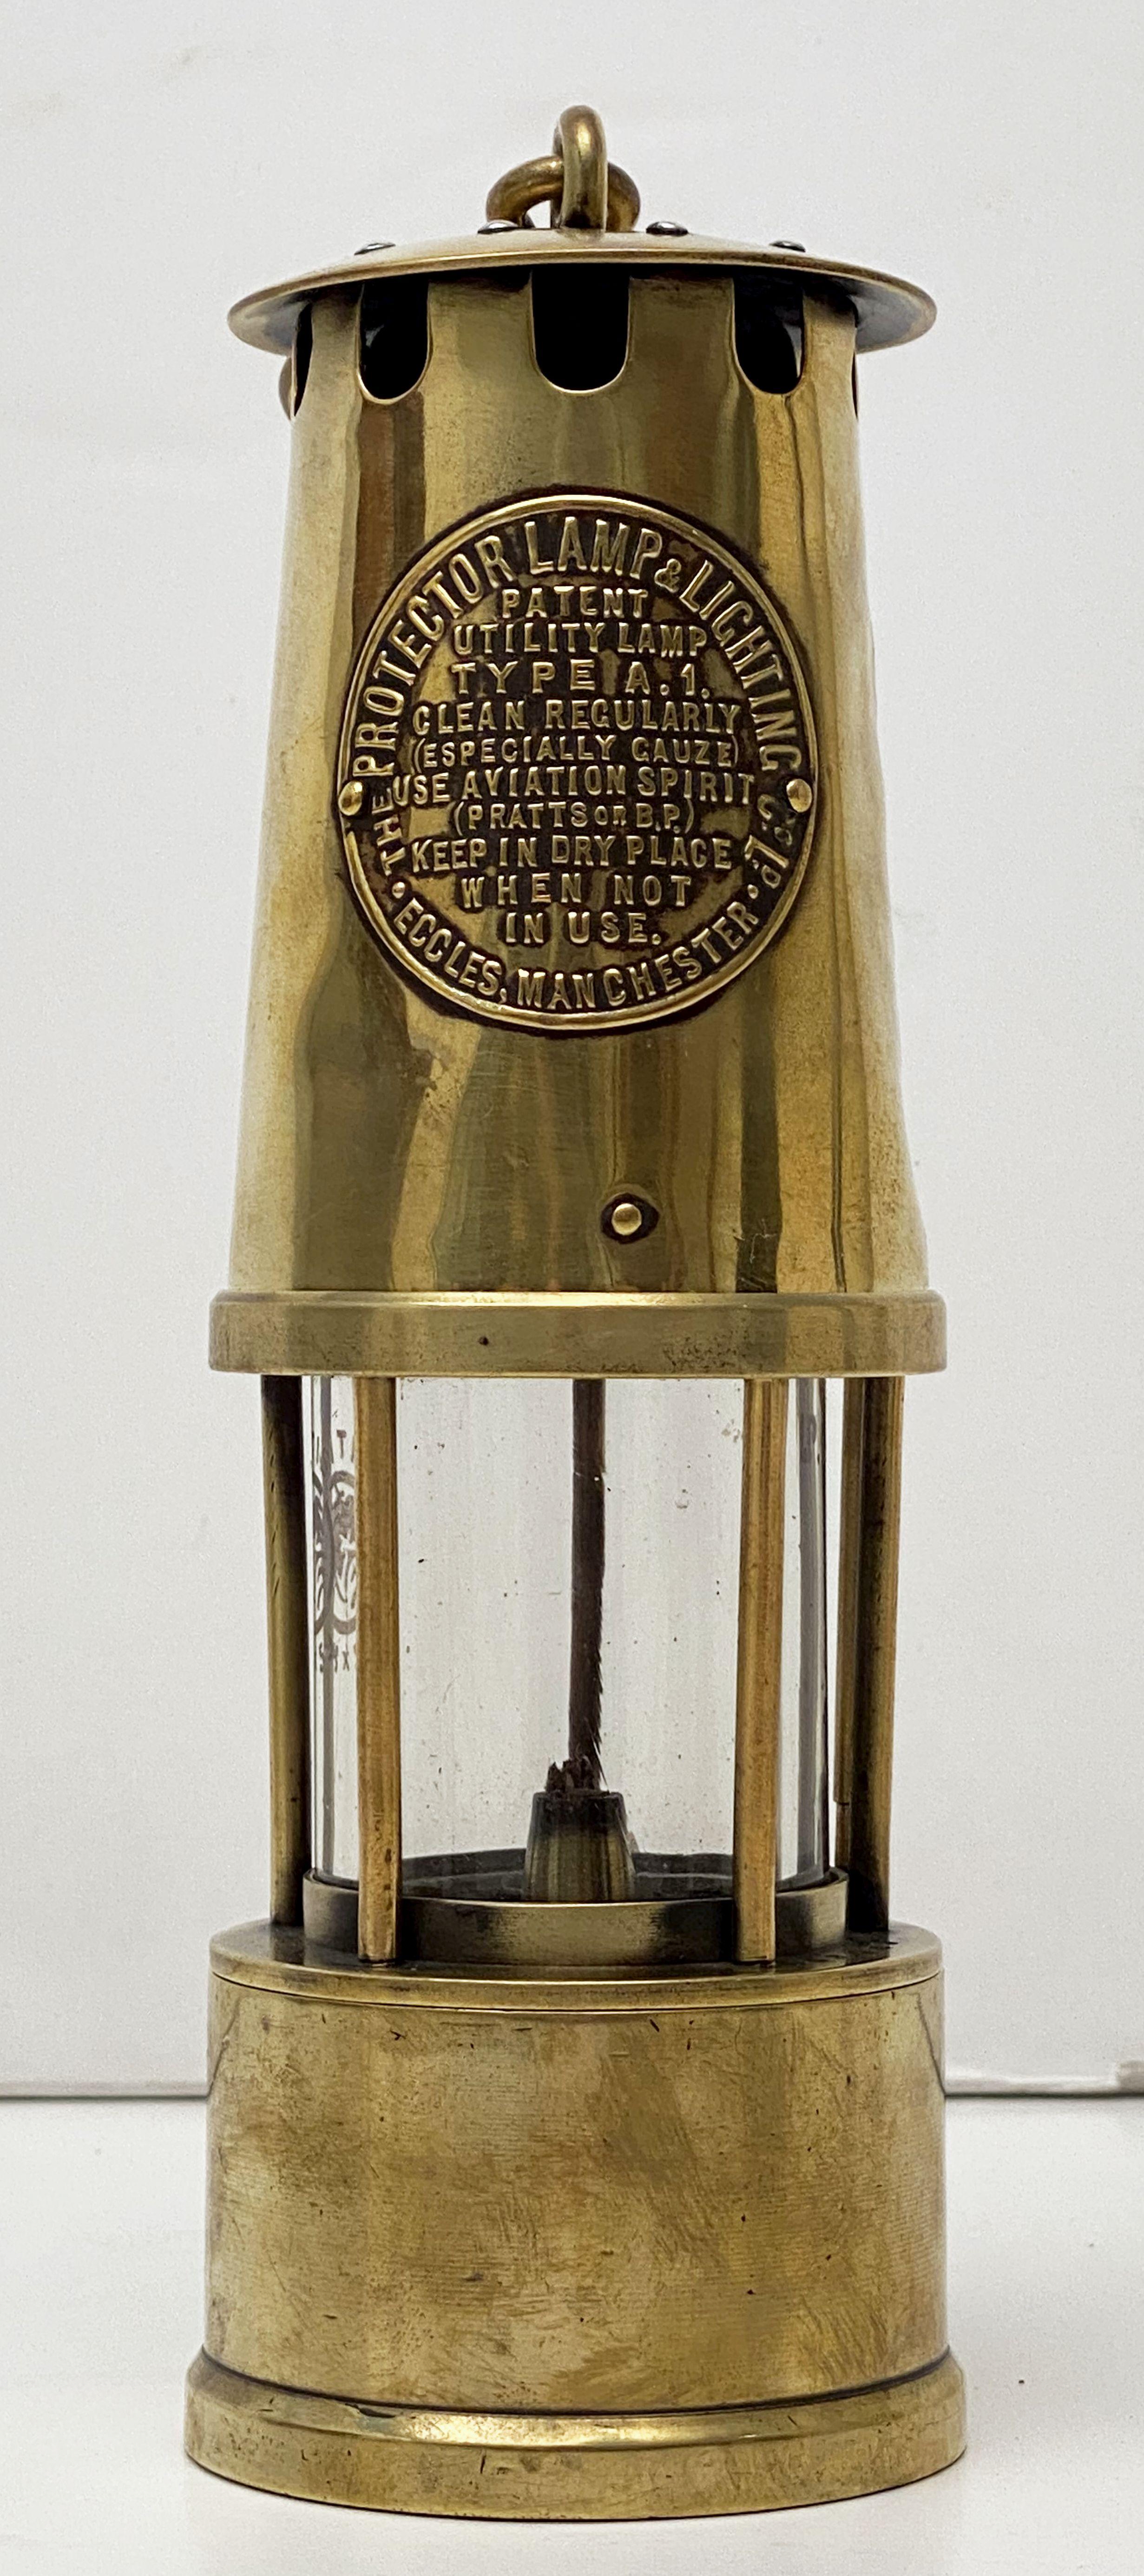 A fine vintage English miner's lamp or safety lantern of brass and steel in working order.
With maker's label - Inscription reads: 

